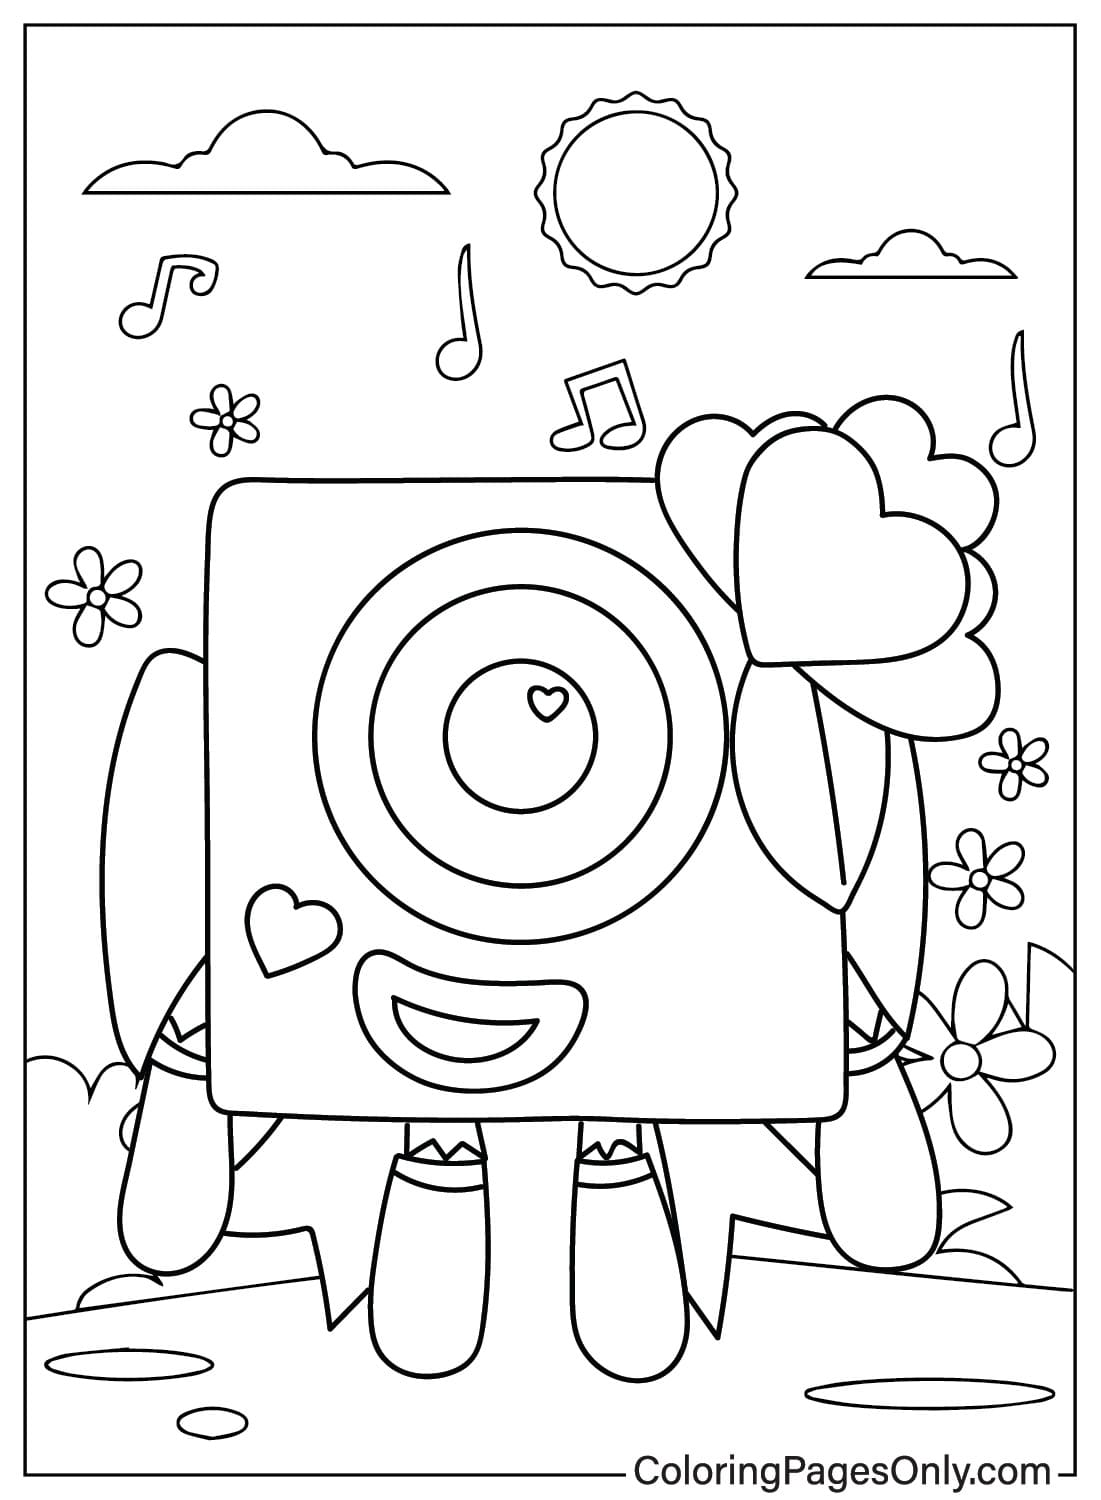 Numberblocks One Free Coloring Page Coloring Page